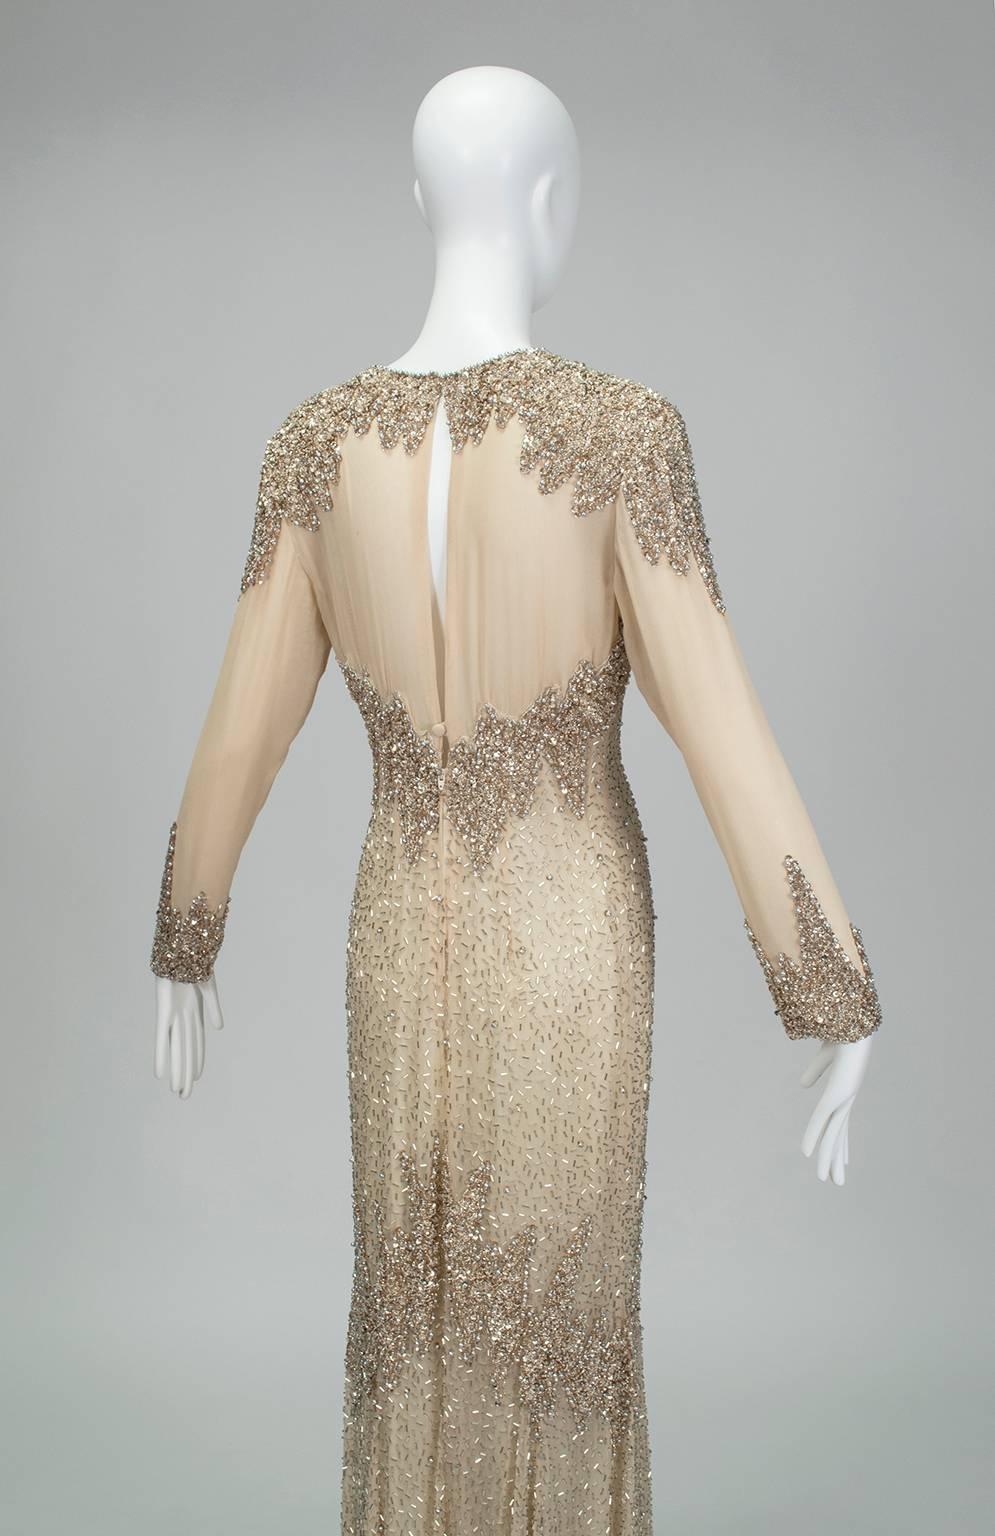 Oleg Cassini Nude Rose Gold Bead and Sequin Illusion Evening Gown - US 6, 1990s For Sale 2